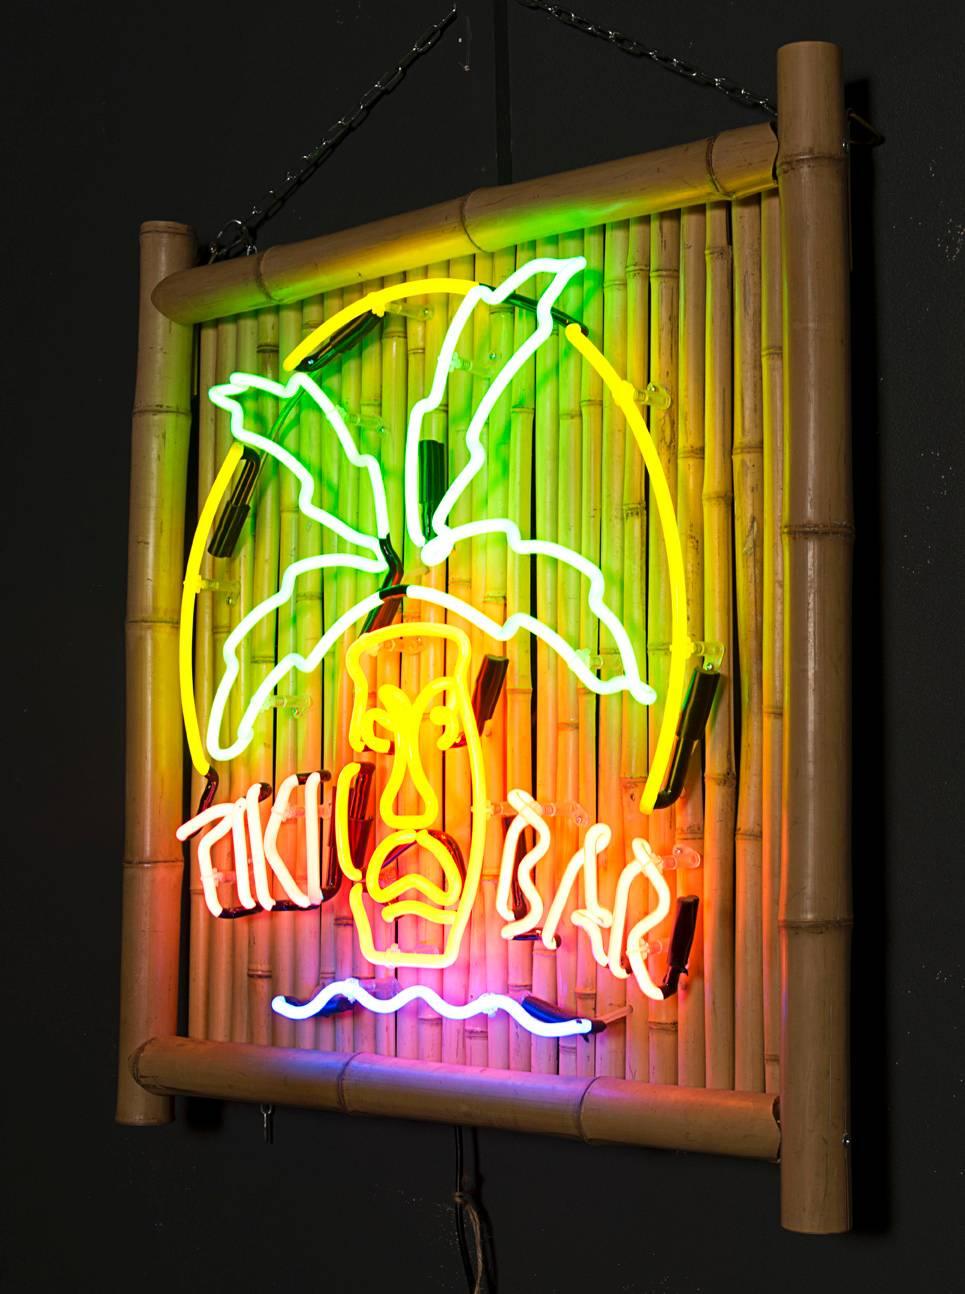 God's Own Junkyard designed Neon Artwork. 

Bamboo and Neon Tikki Bar Sign.

Lights of Soho present... God's Own Junkyard. New & used neon fantasies, salvaged signs, vintage neons, old movie props and retro displays. Neon art made from found